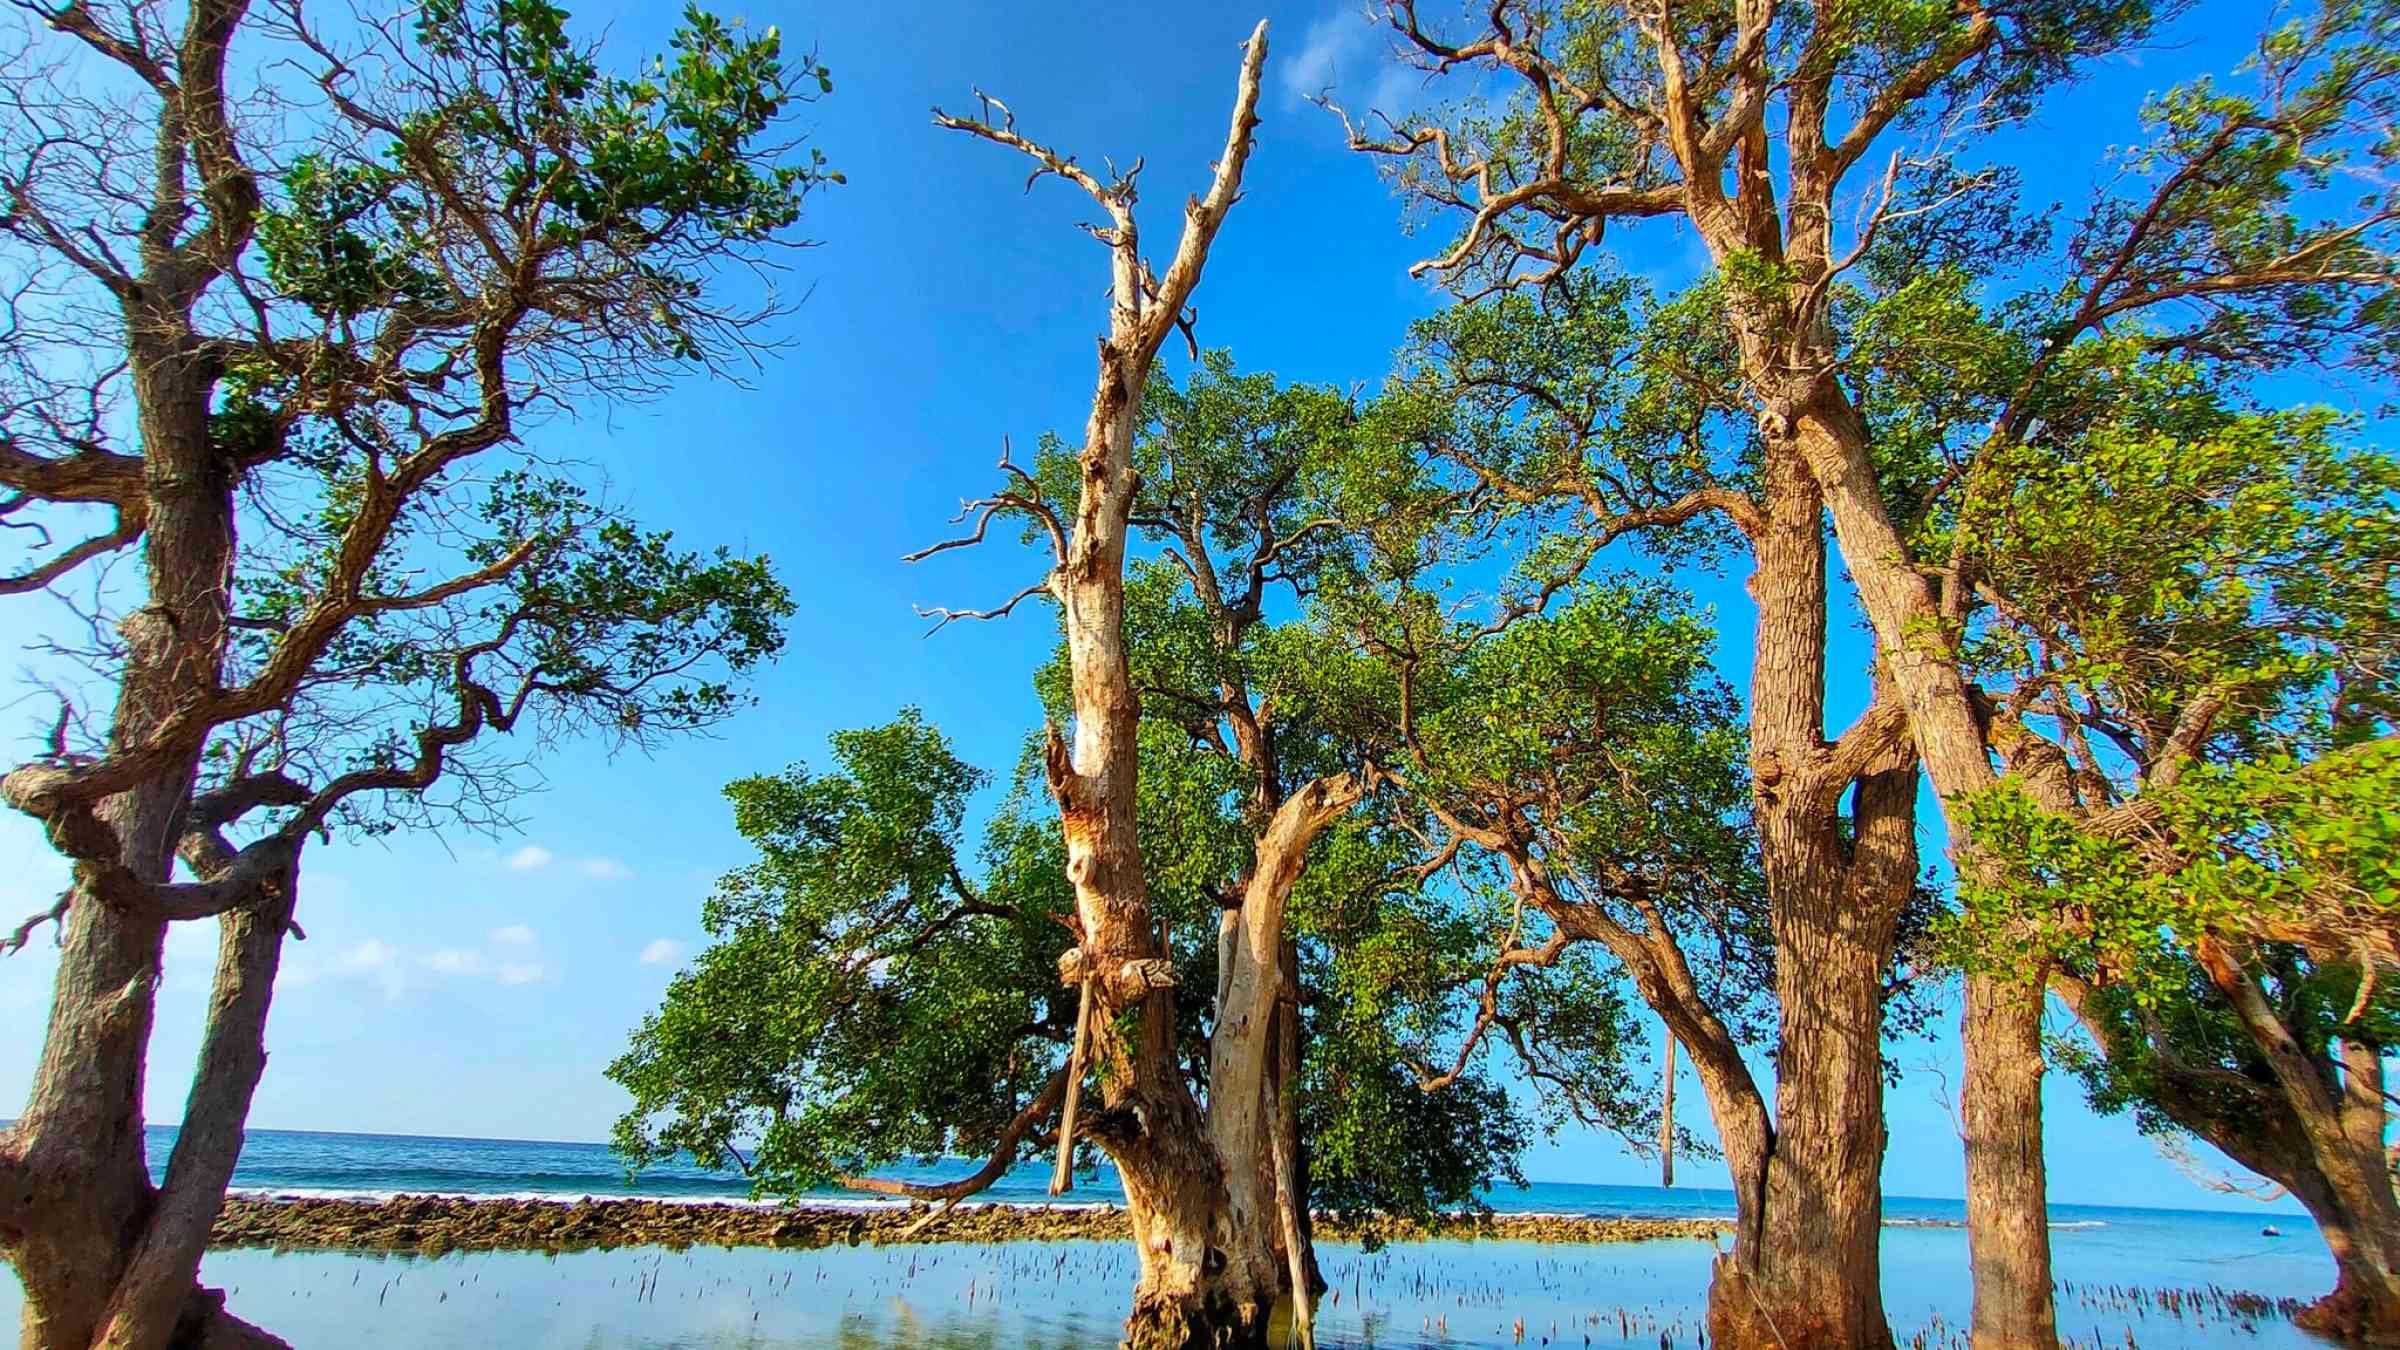 mangrove trees that were hit by the Tsunami several years ago on a beach in the Aceh Indonesia